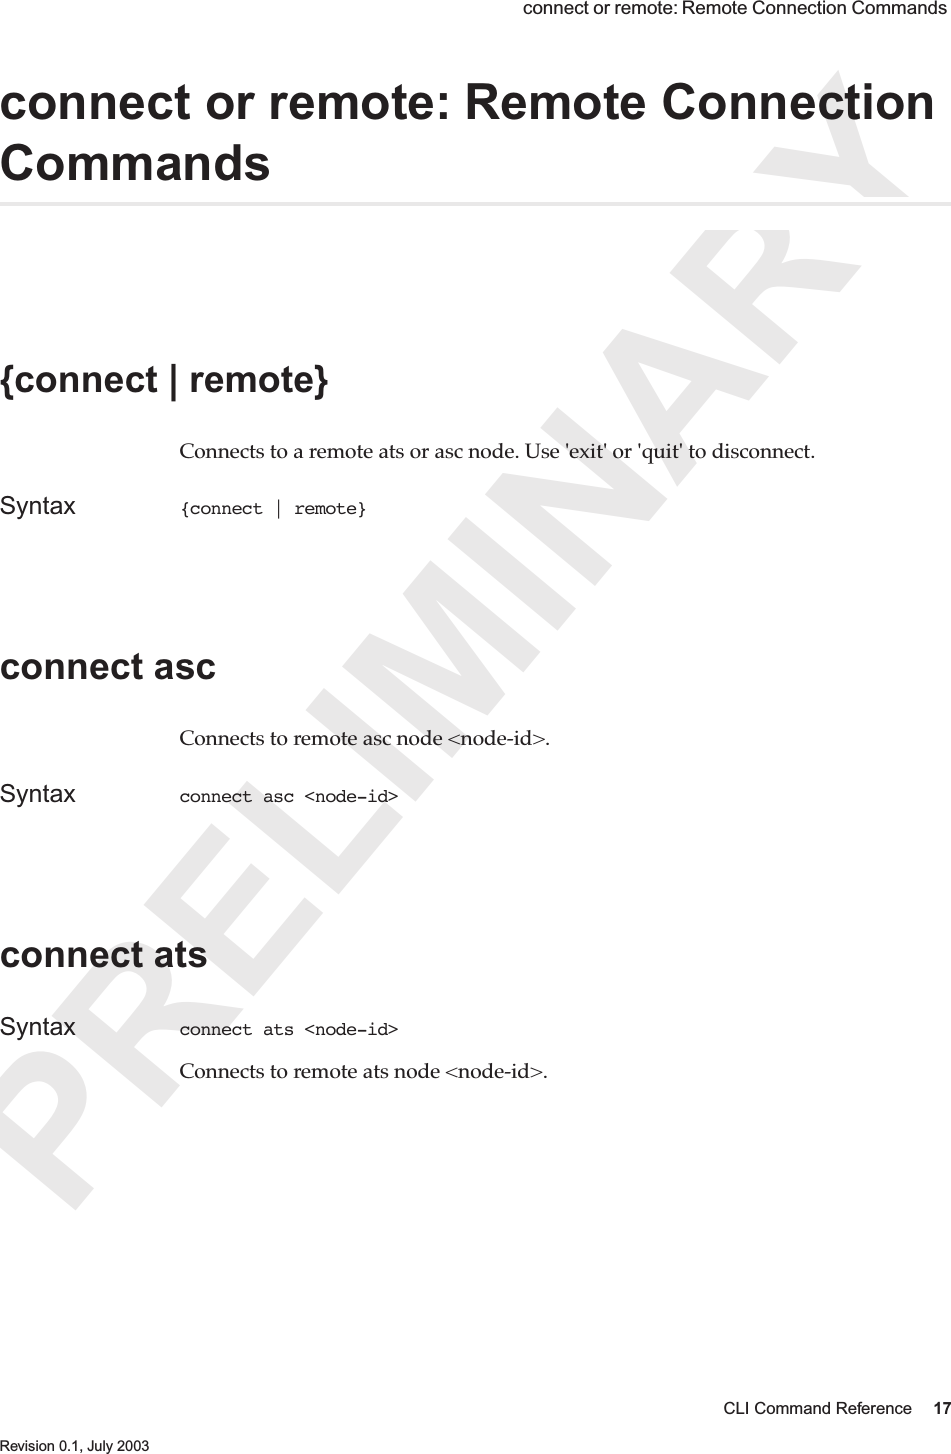 PRELIMINARYCLI Command Reference 17 Revision 0.1, July 2003 connect or remote: Remote Connection Commands connect or remote: Remote Connection Commands{connect | remote} Connects to a remote ats or asc node. Use &apos;exit&apos; or &apos;quit&apos; to disconnect.Syntax {connect | remote} connect ascConnects to remote asc node &lt;node-id&gt;.Syntax connect asc &lt;node-id&gt;connect atsSyntax connect ats &lt;node-id&gt;Connects to remote ats node &lt;node-id&gt;.